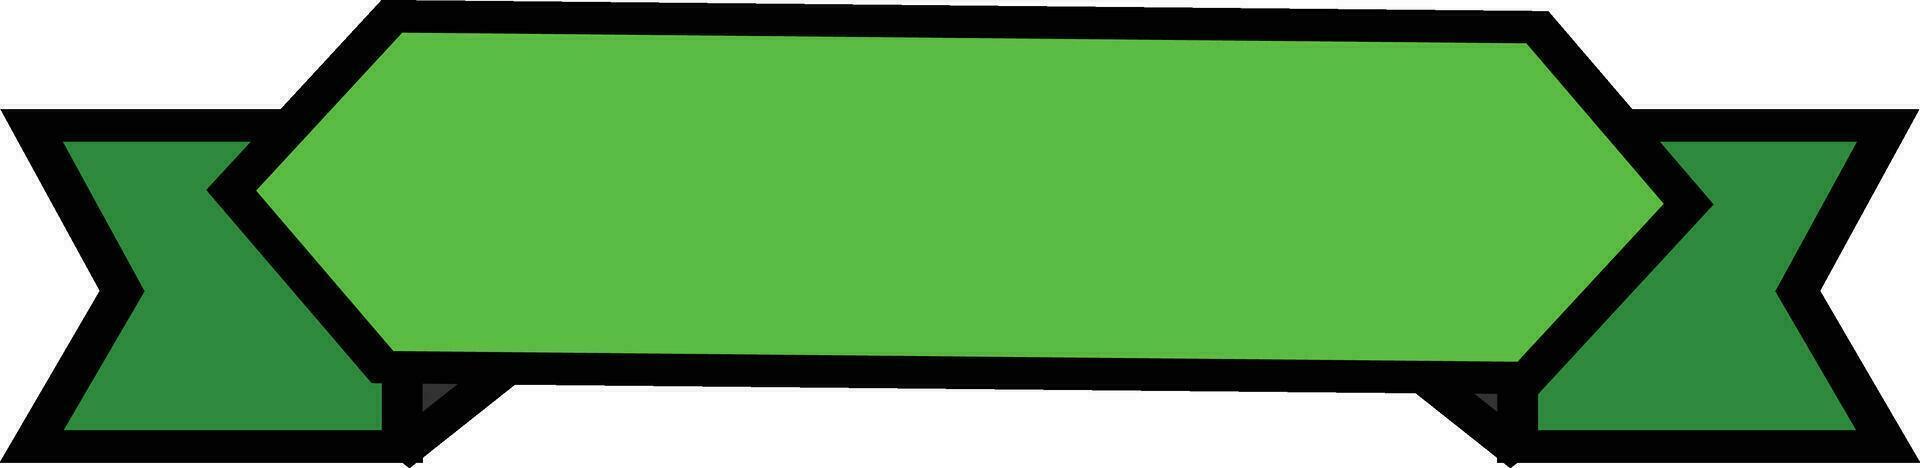 This is an illustration of a green message board with copy space. banner element design for various purposes vector